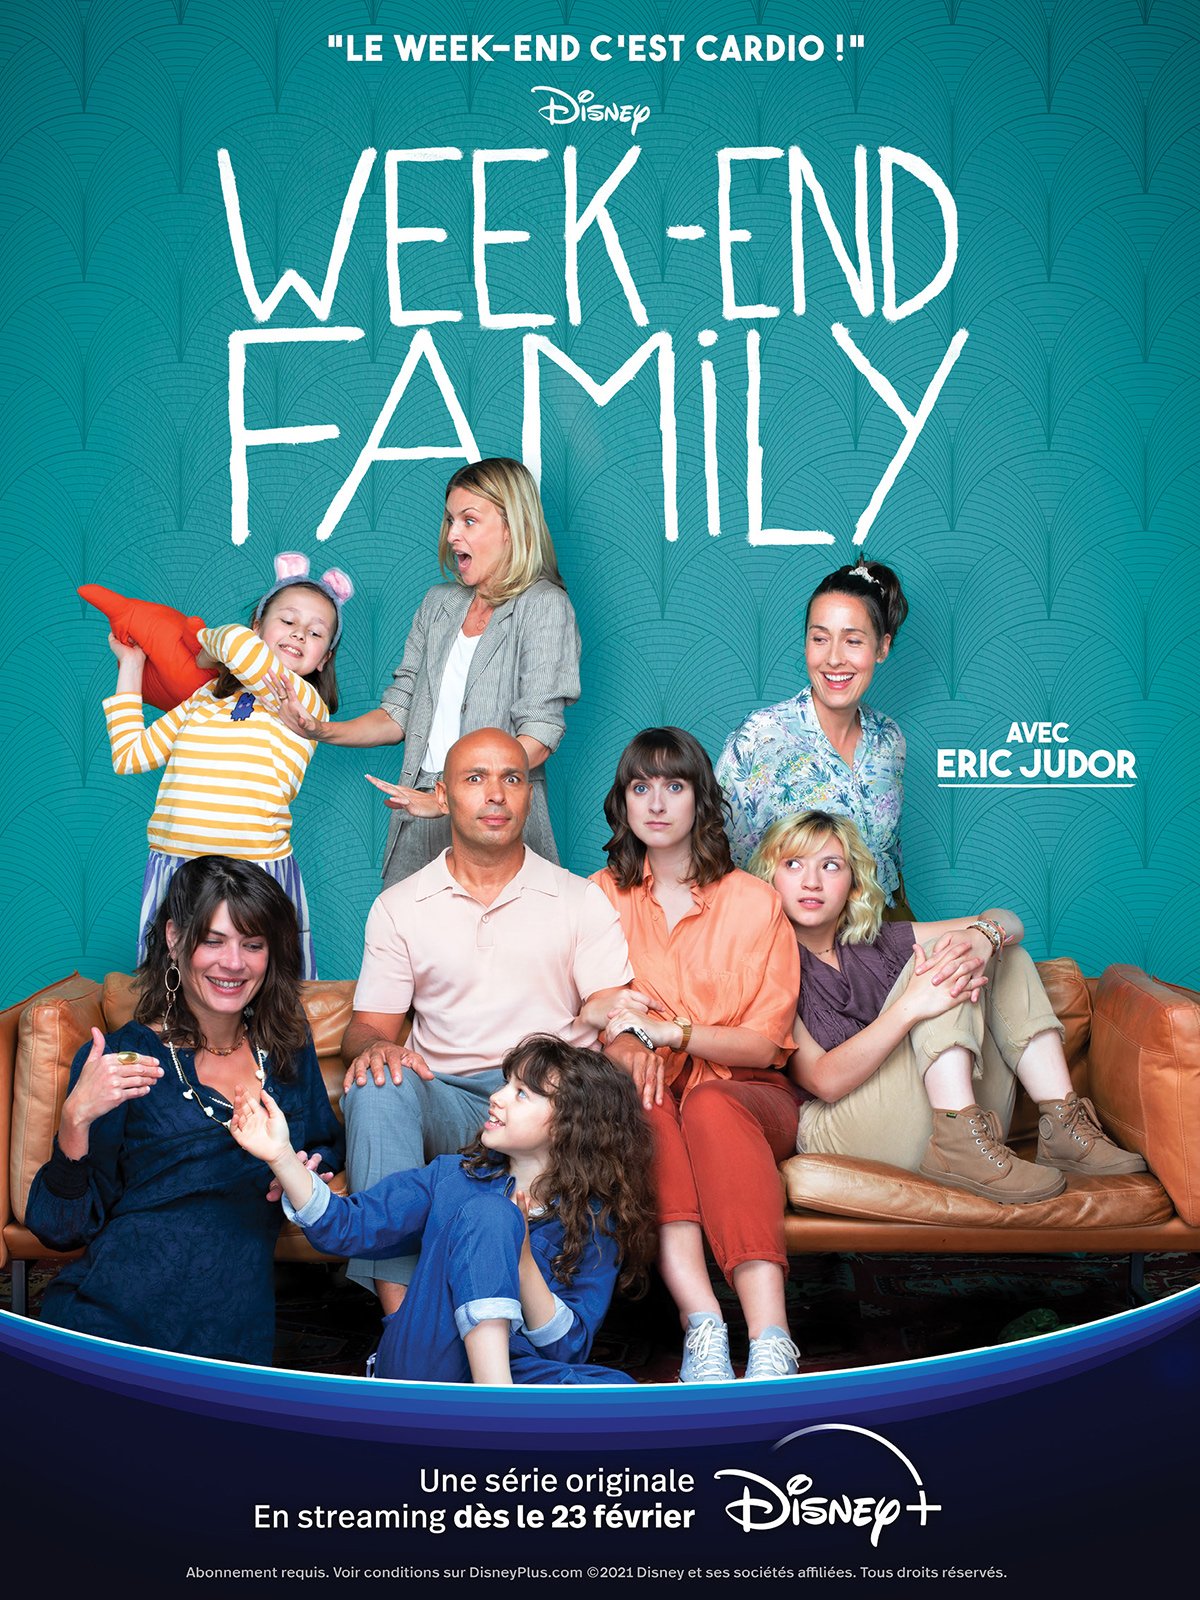 Week-end Family - Série TV 2022 streaming VF gratuit complet